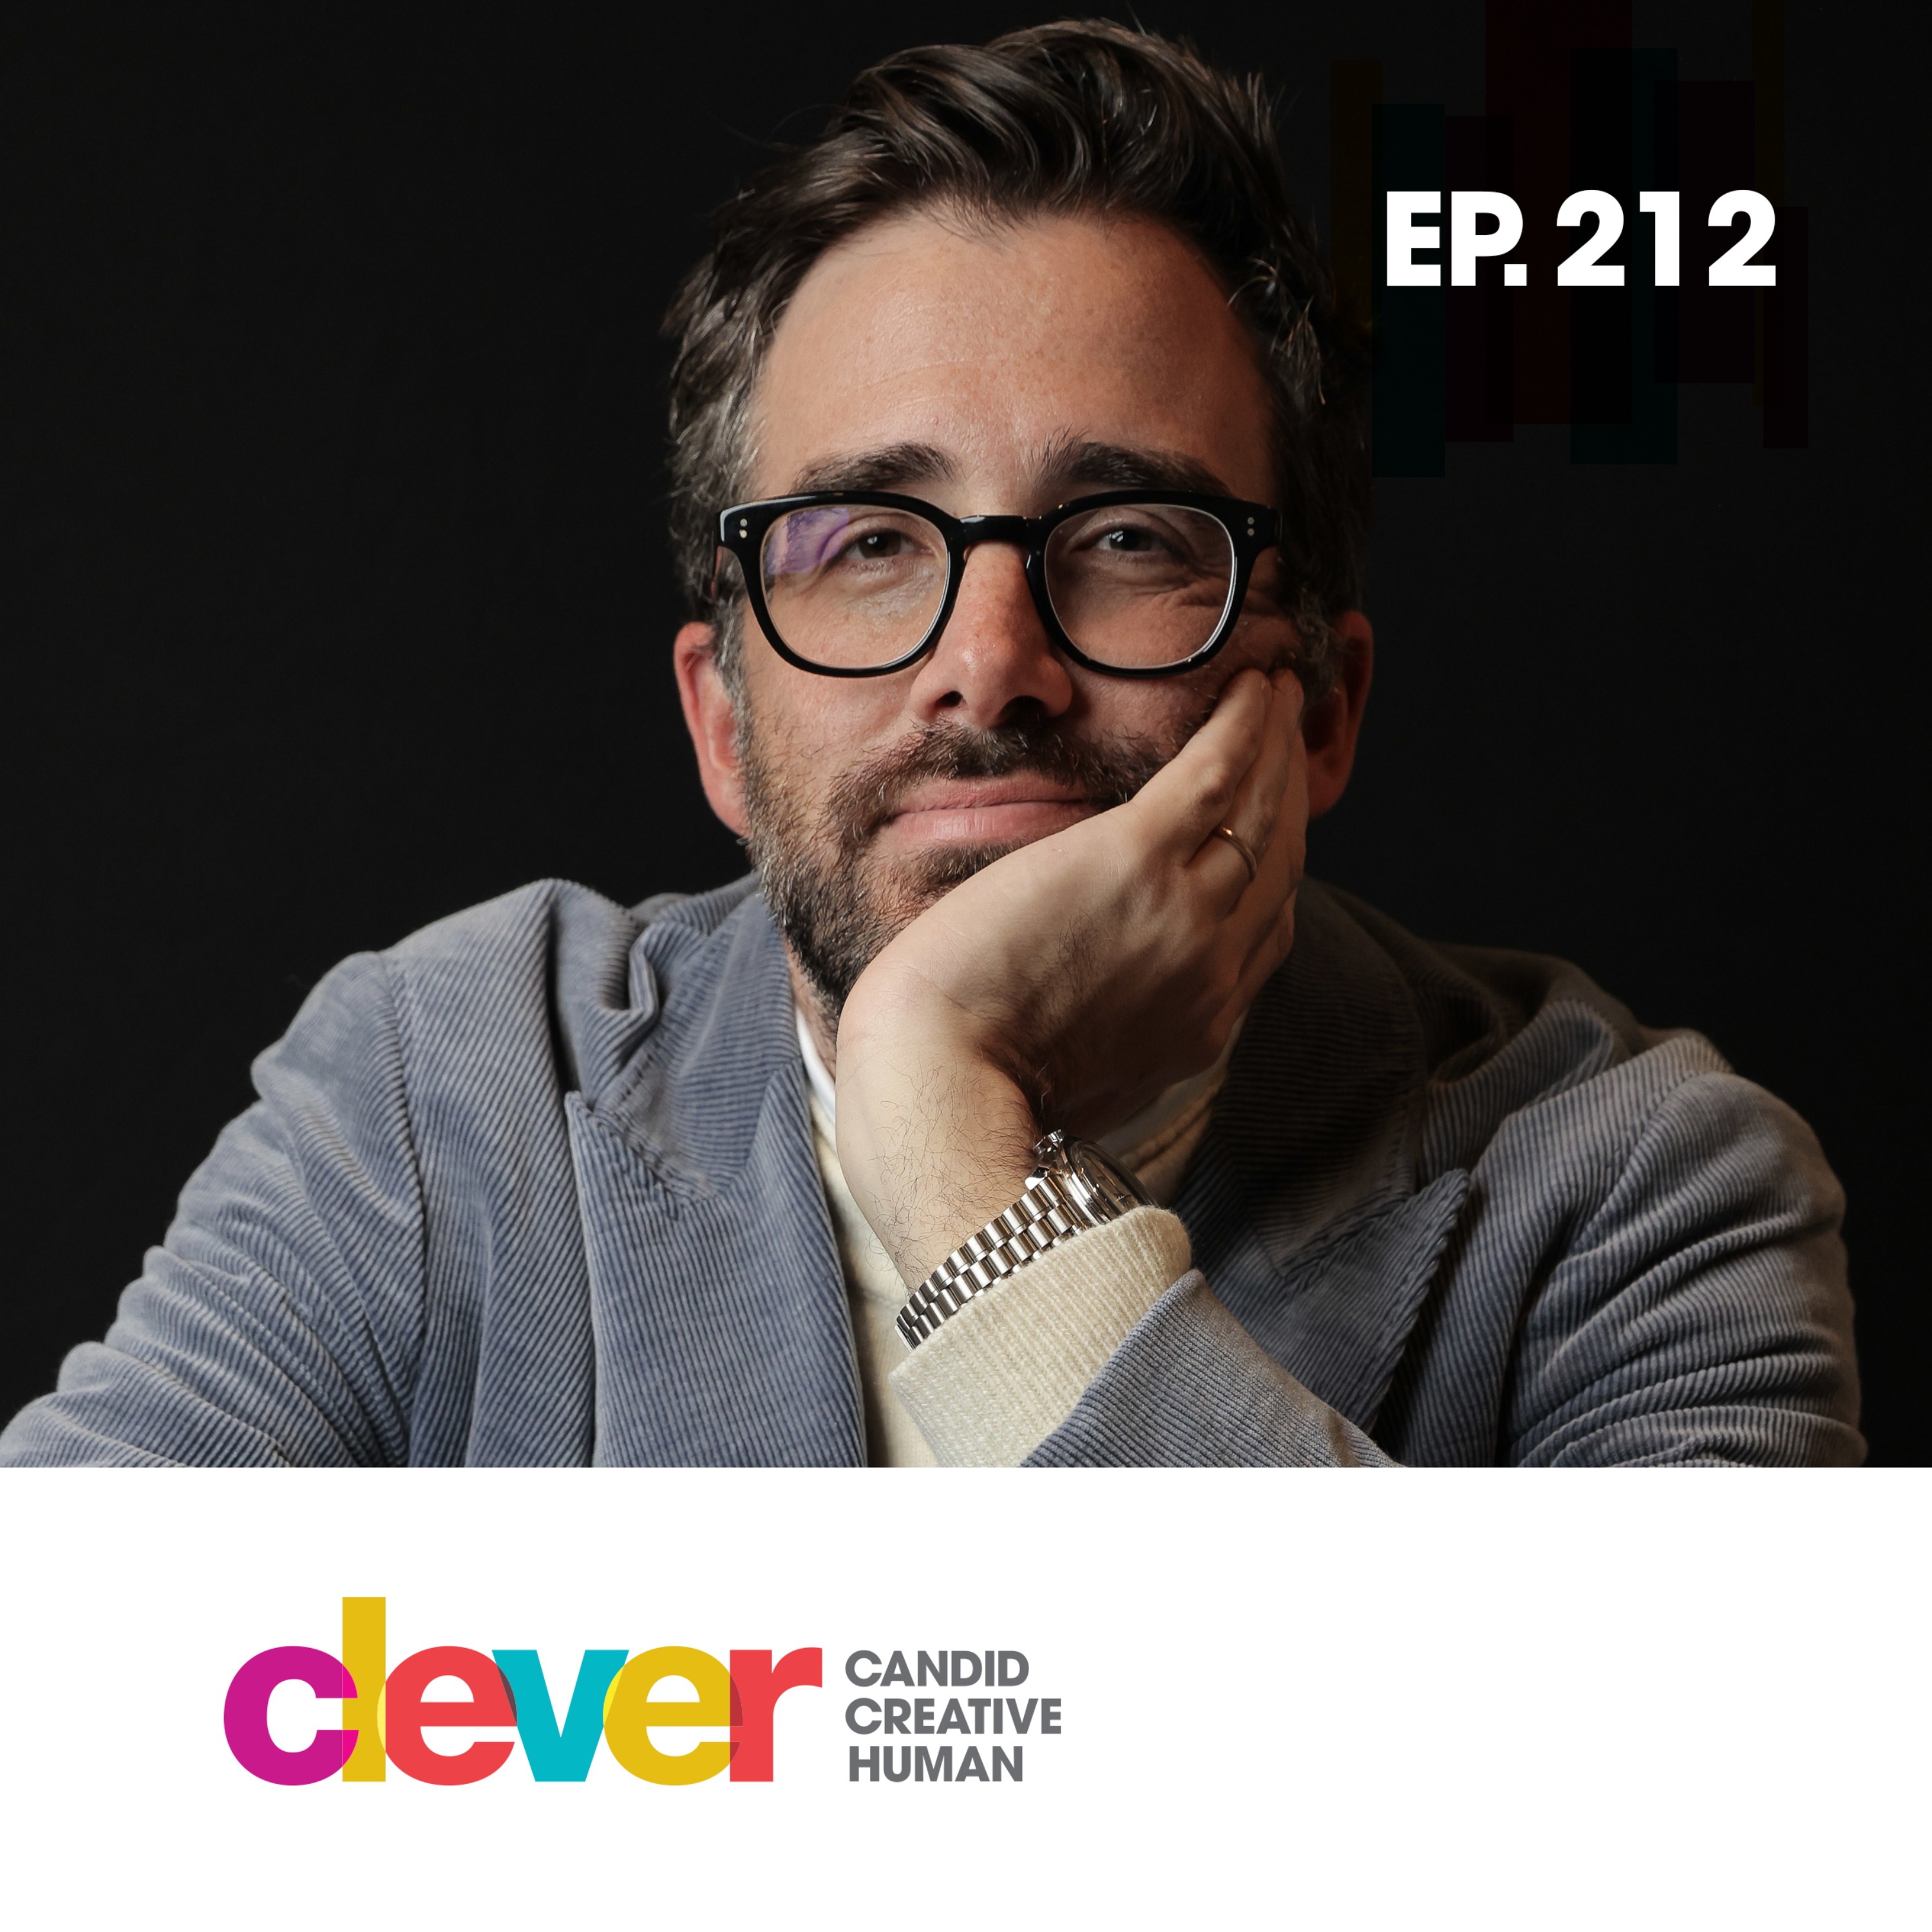 Ep. 212: HODINKEE’s Ben Clymer on Agency, Permanence, and the Talismans of Life